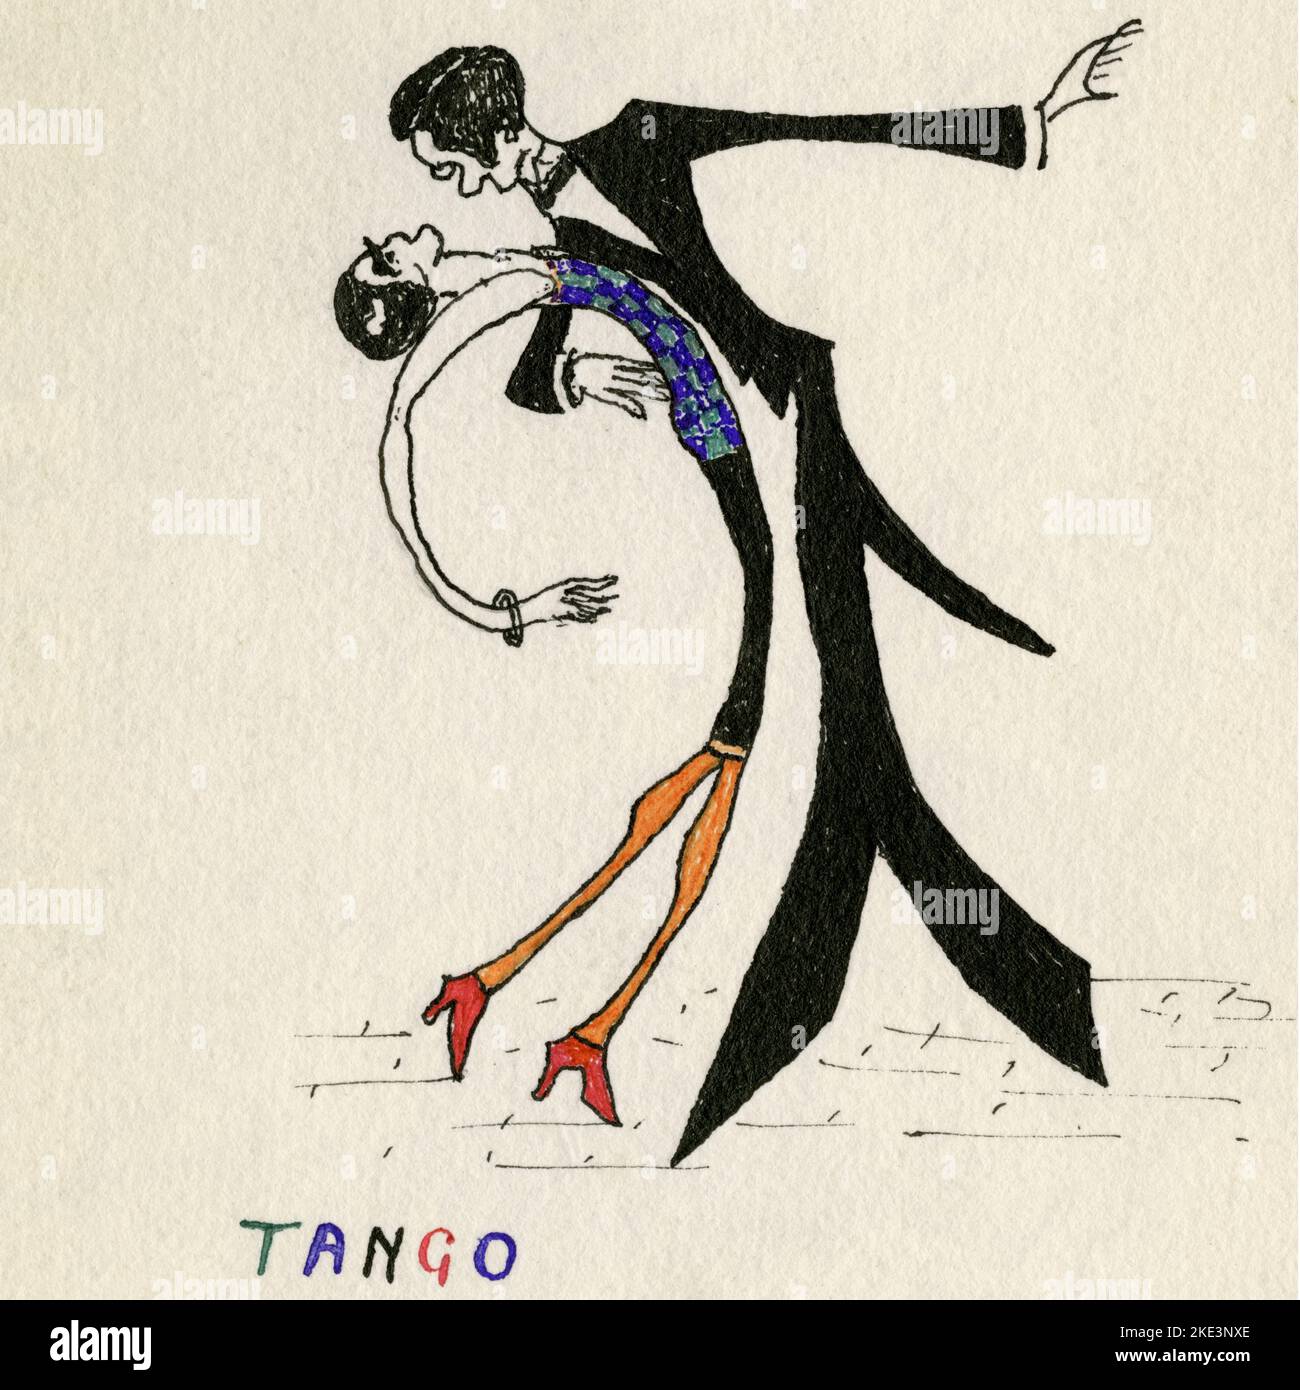 Extremely slim extreme tango: square format detail of ‘Tango 1926’, a cubist-style watercolour depicting an ultra-thin couple throwing a curvy shape as they tango the night away, drawn, painted and signed in November 1925 by British artist R. Biass, perhaps as his prediction of how the South American dance craze might develop. Stock Photo